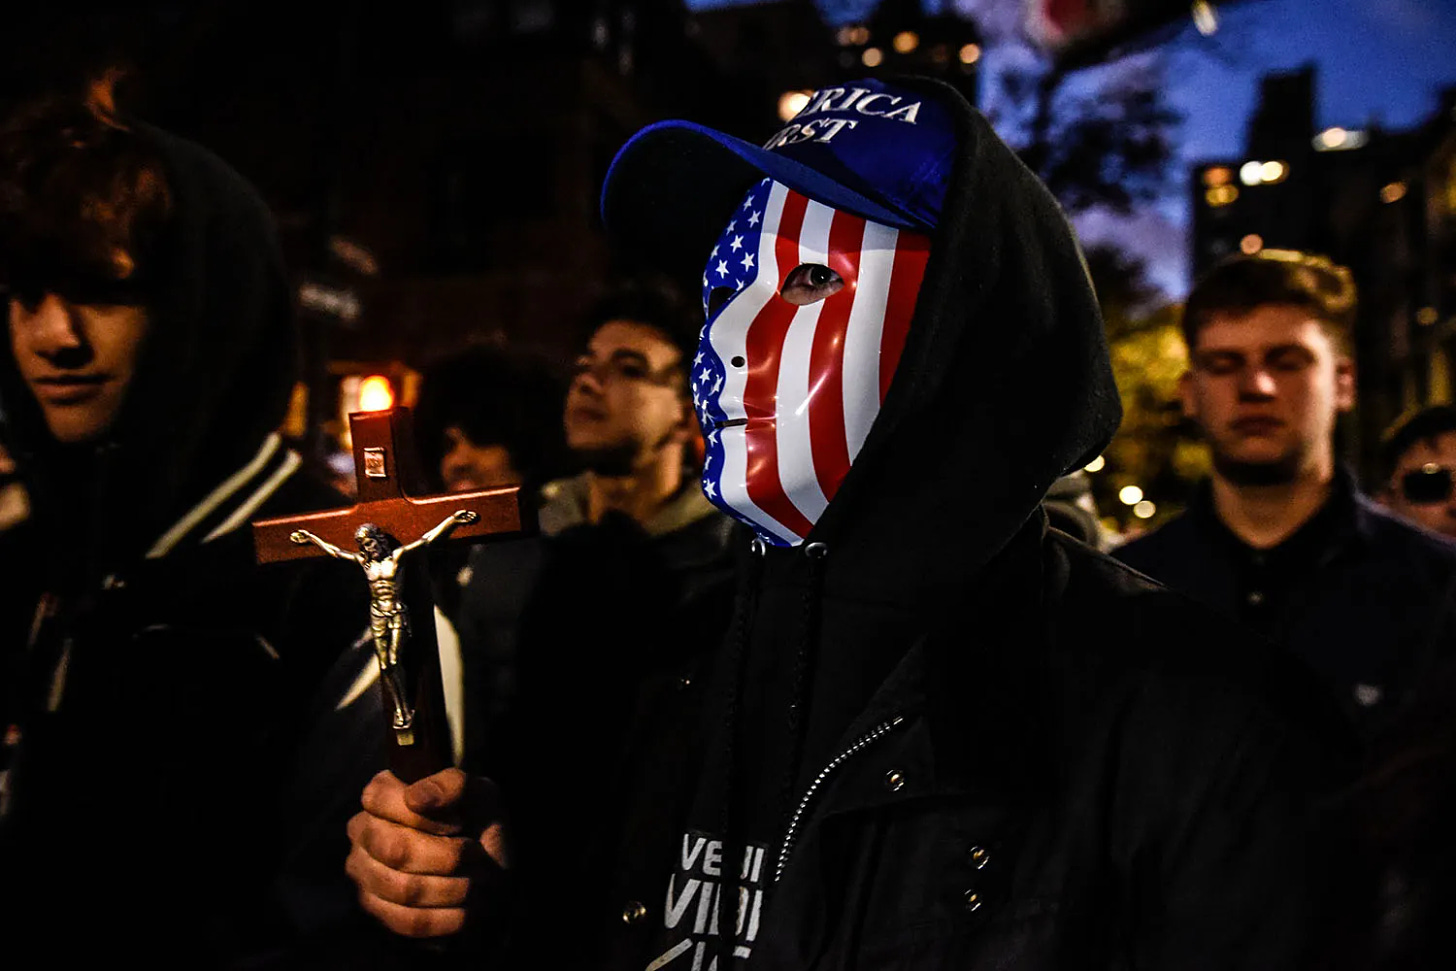 People associated with the far-right group America First attend an anti-vaccine protest in New York.